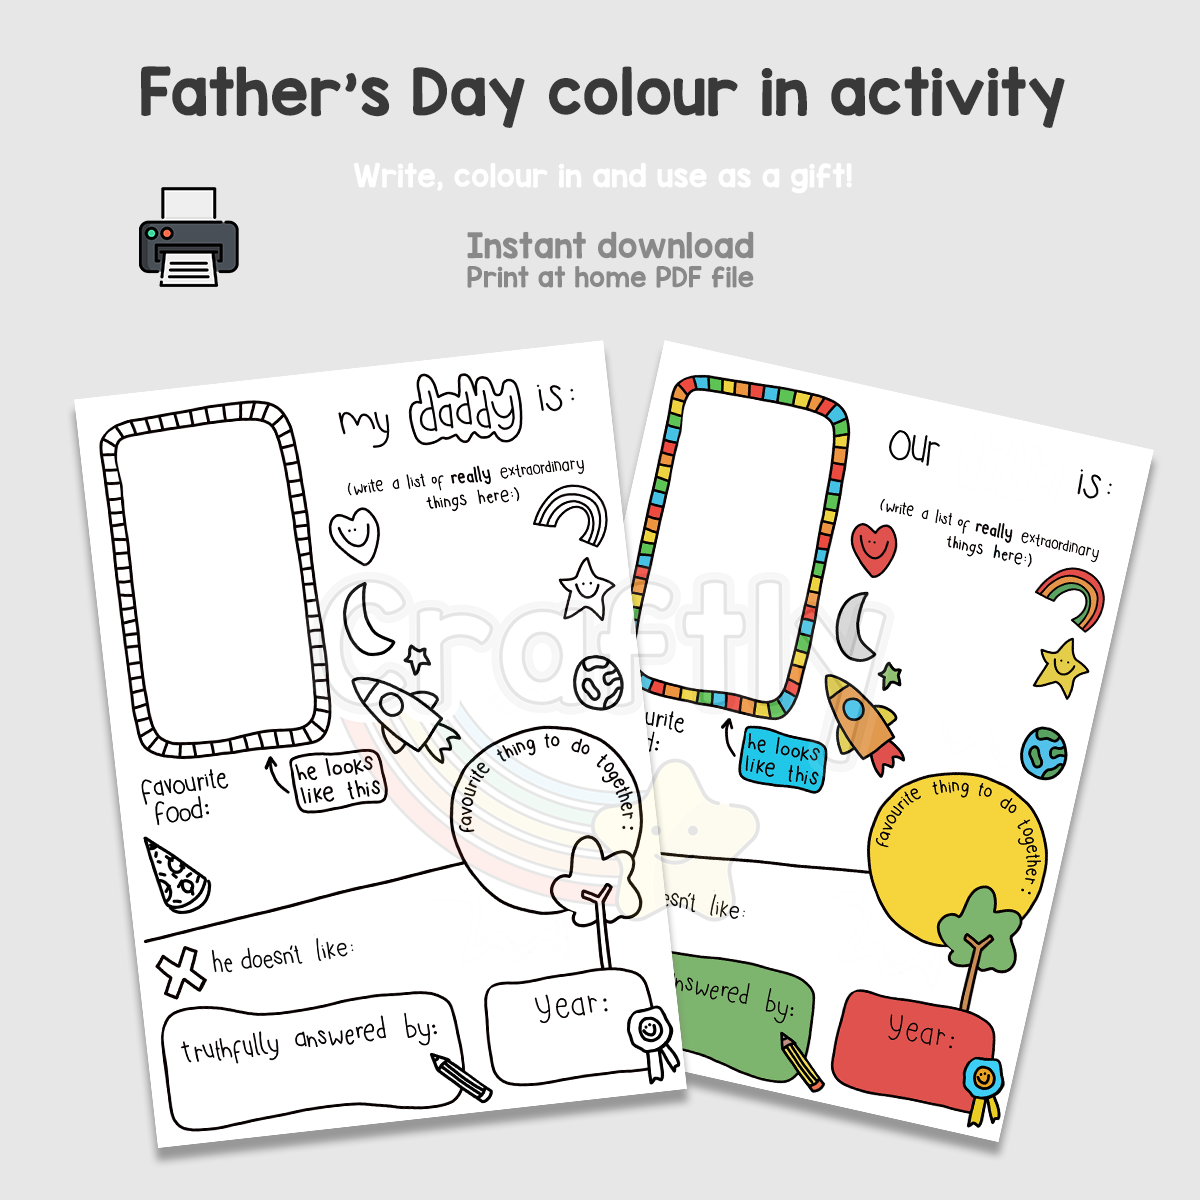 Father's Day Activity (My daddy is..)